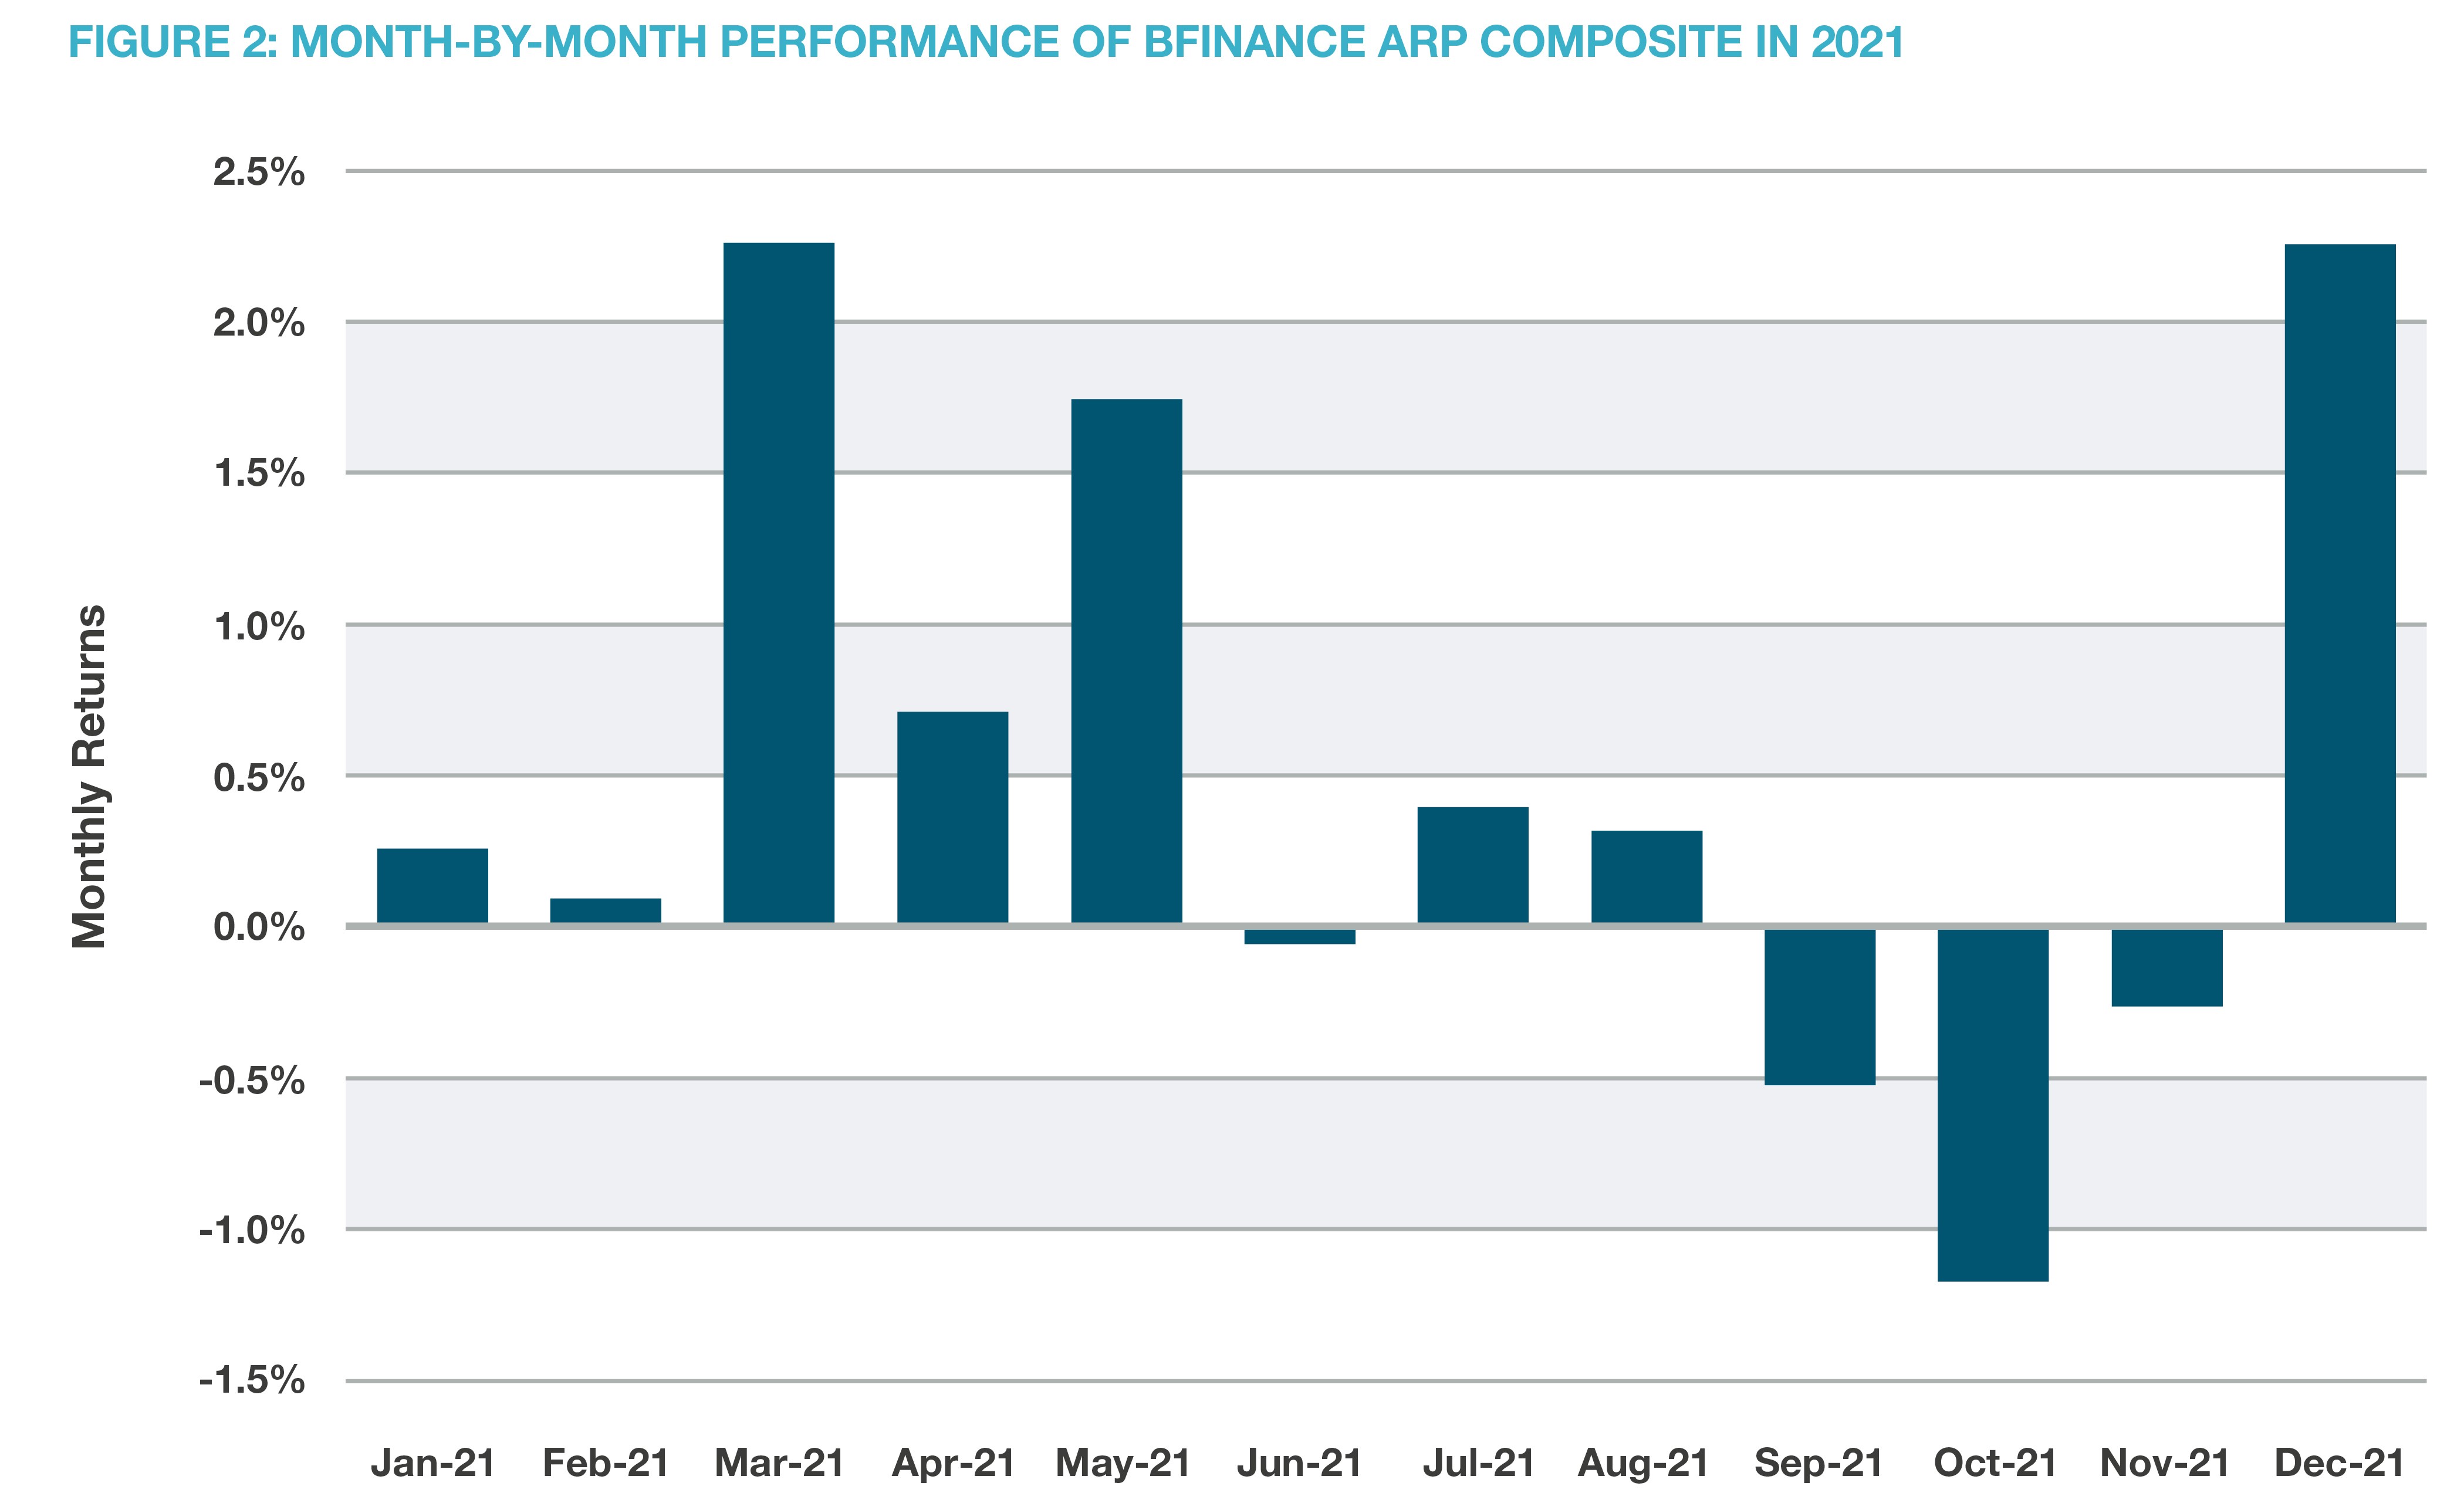 month-by-month performance of bfinance arp composite in 2021